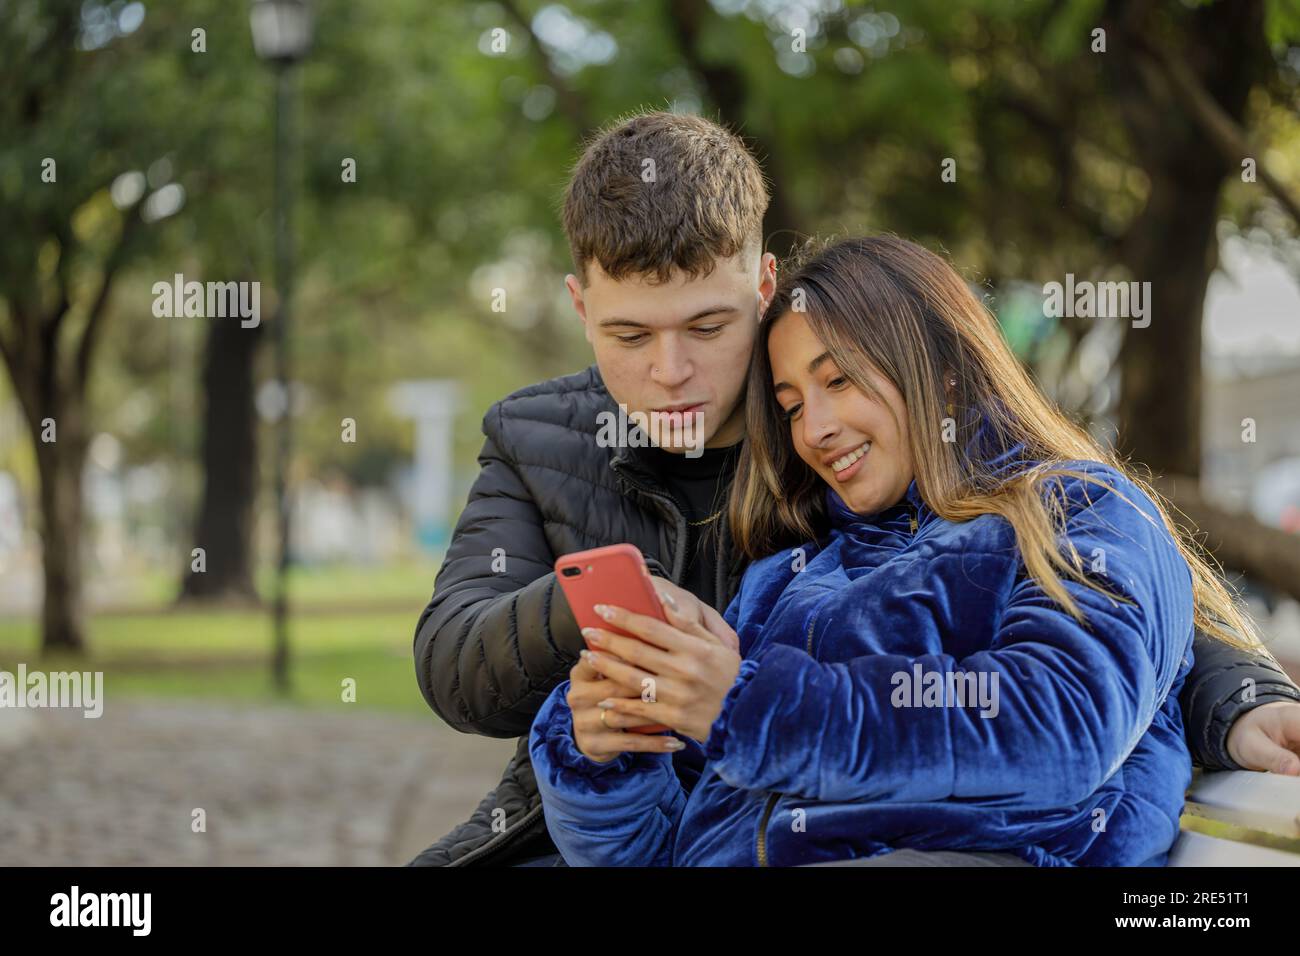 Young couple looking at a mobile phone sitting on a bench in a public park. Stock Photo